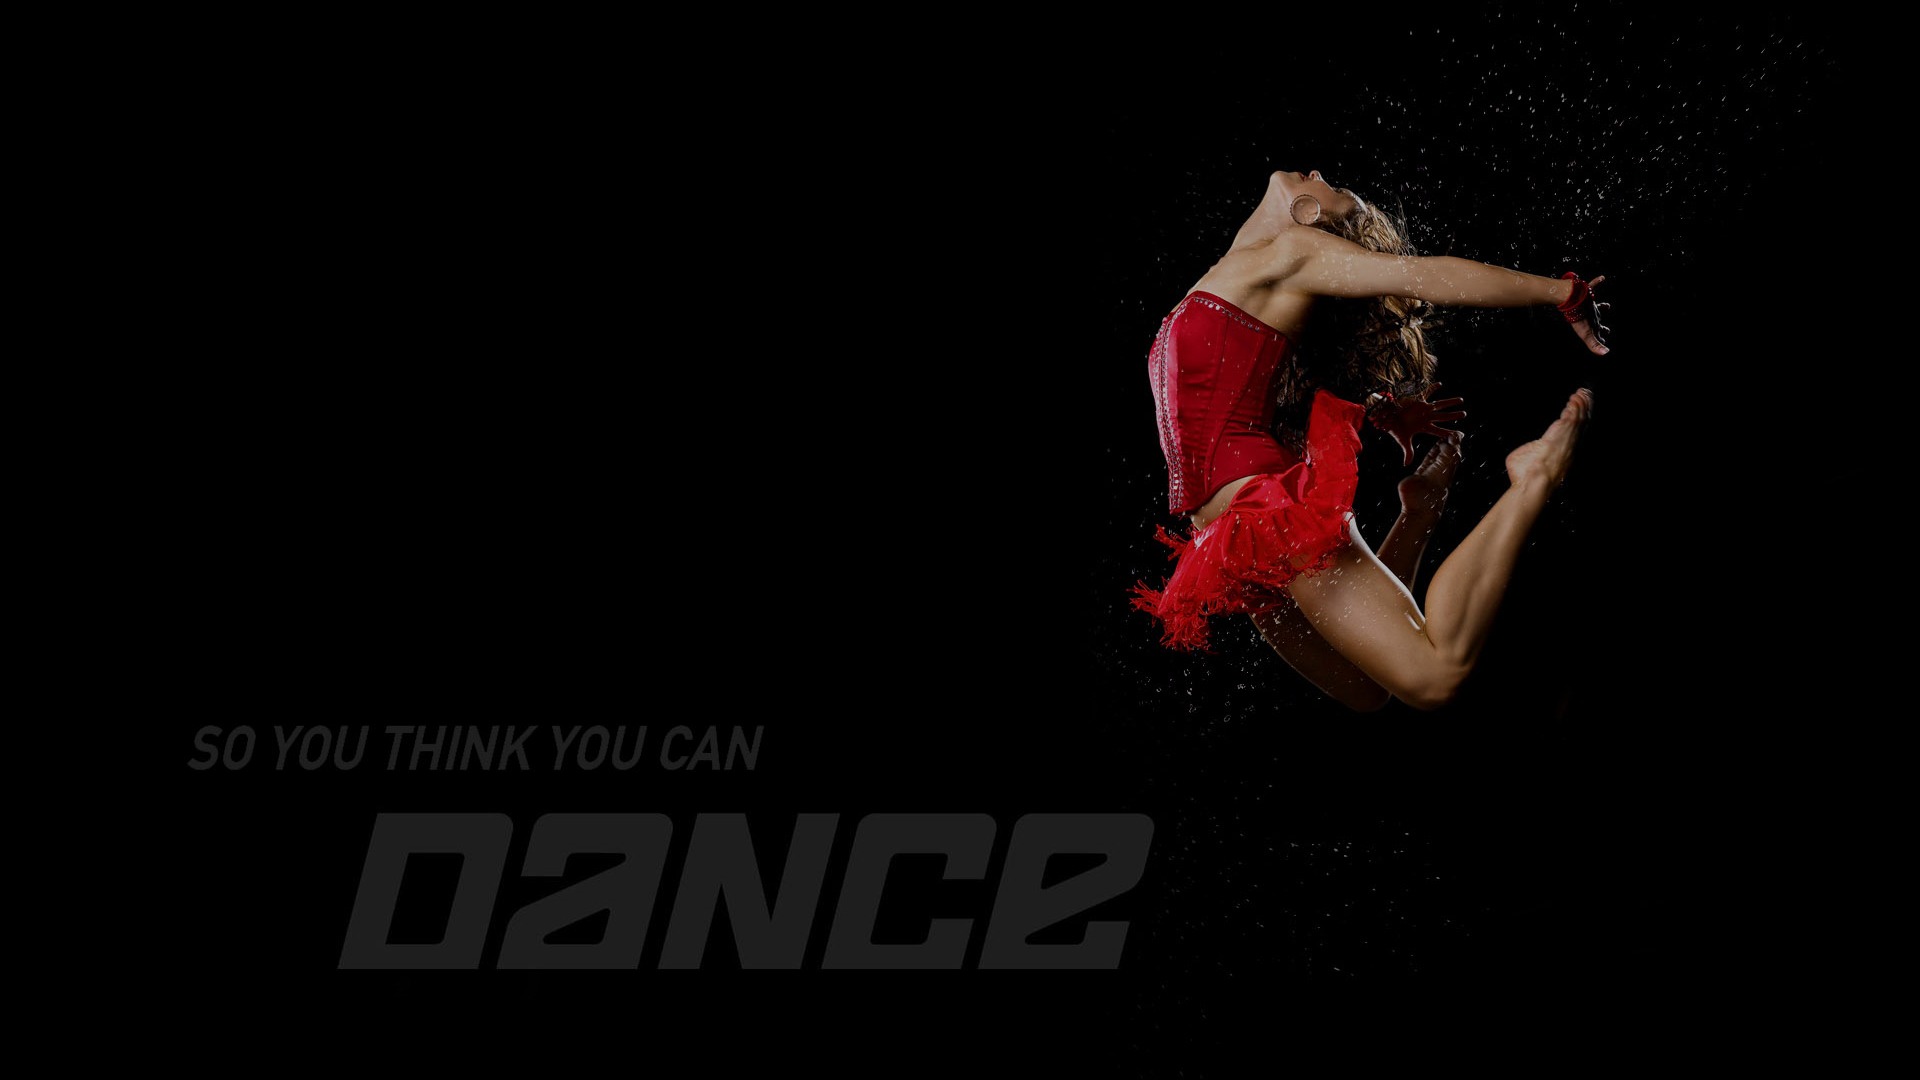 So You Think You Can Dance 舞林爭霸壁紙(二) #1 - 1920x1080